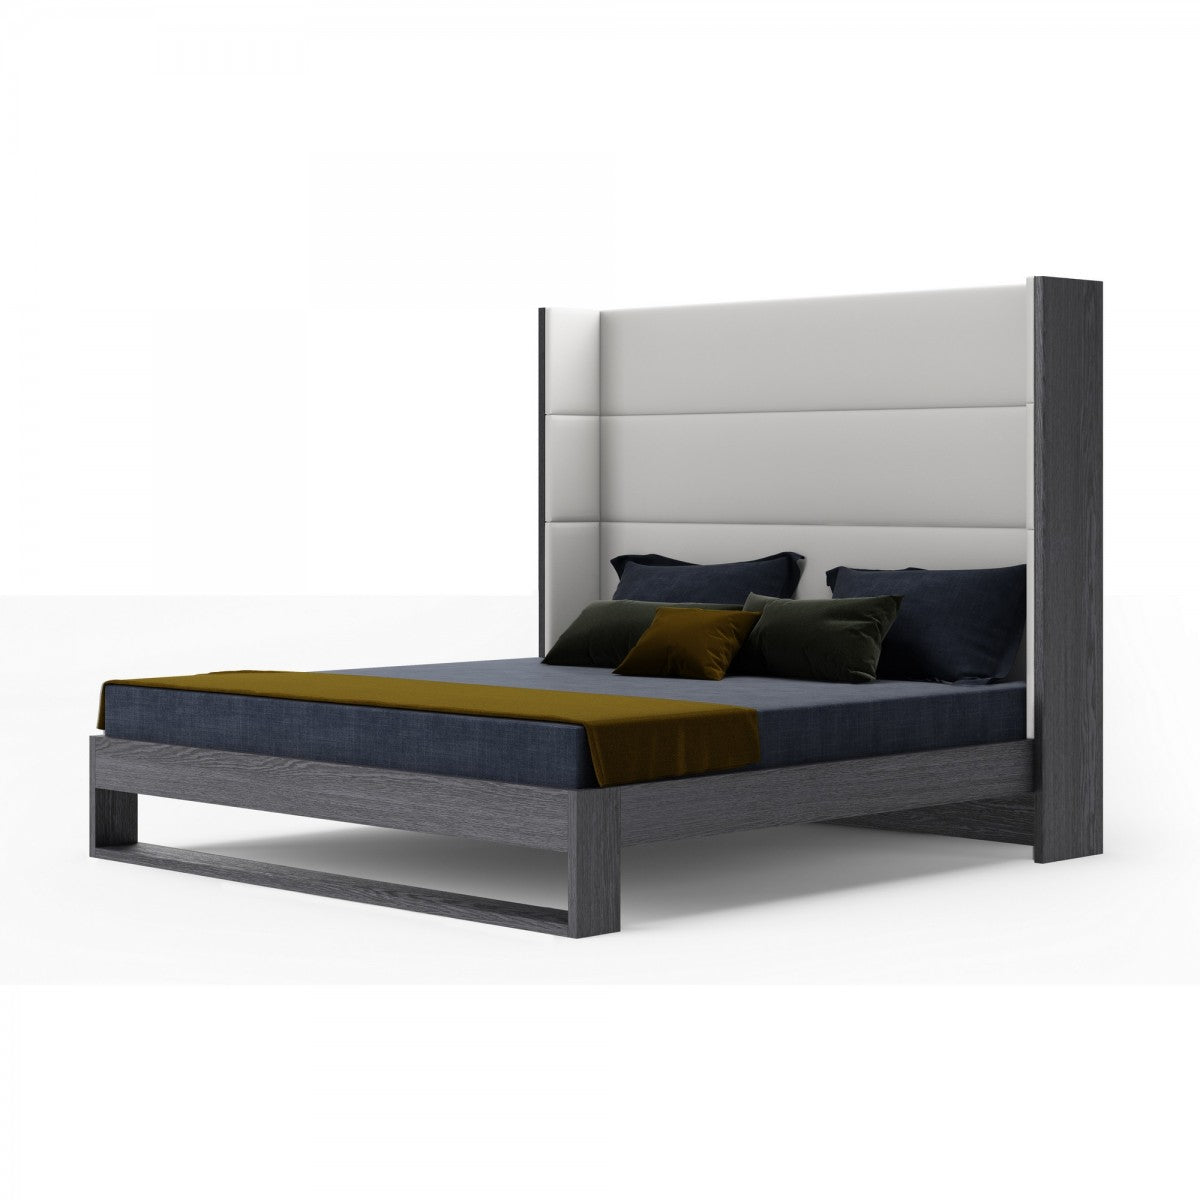 Modrest Heloise by VIG - Contemporary White Leather Bed